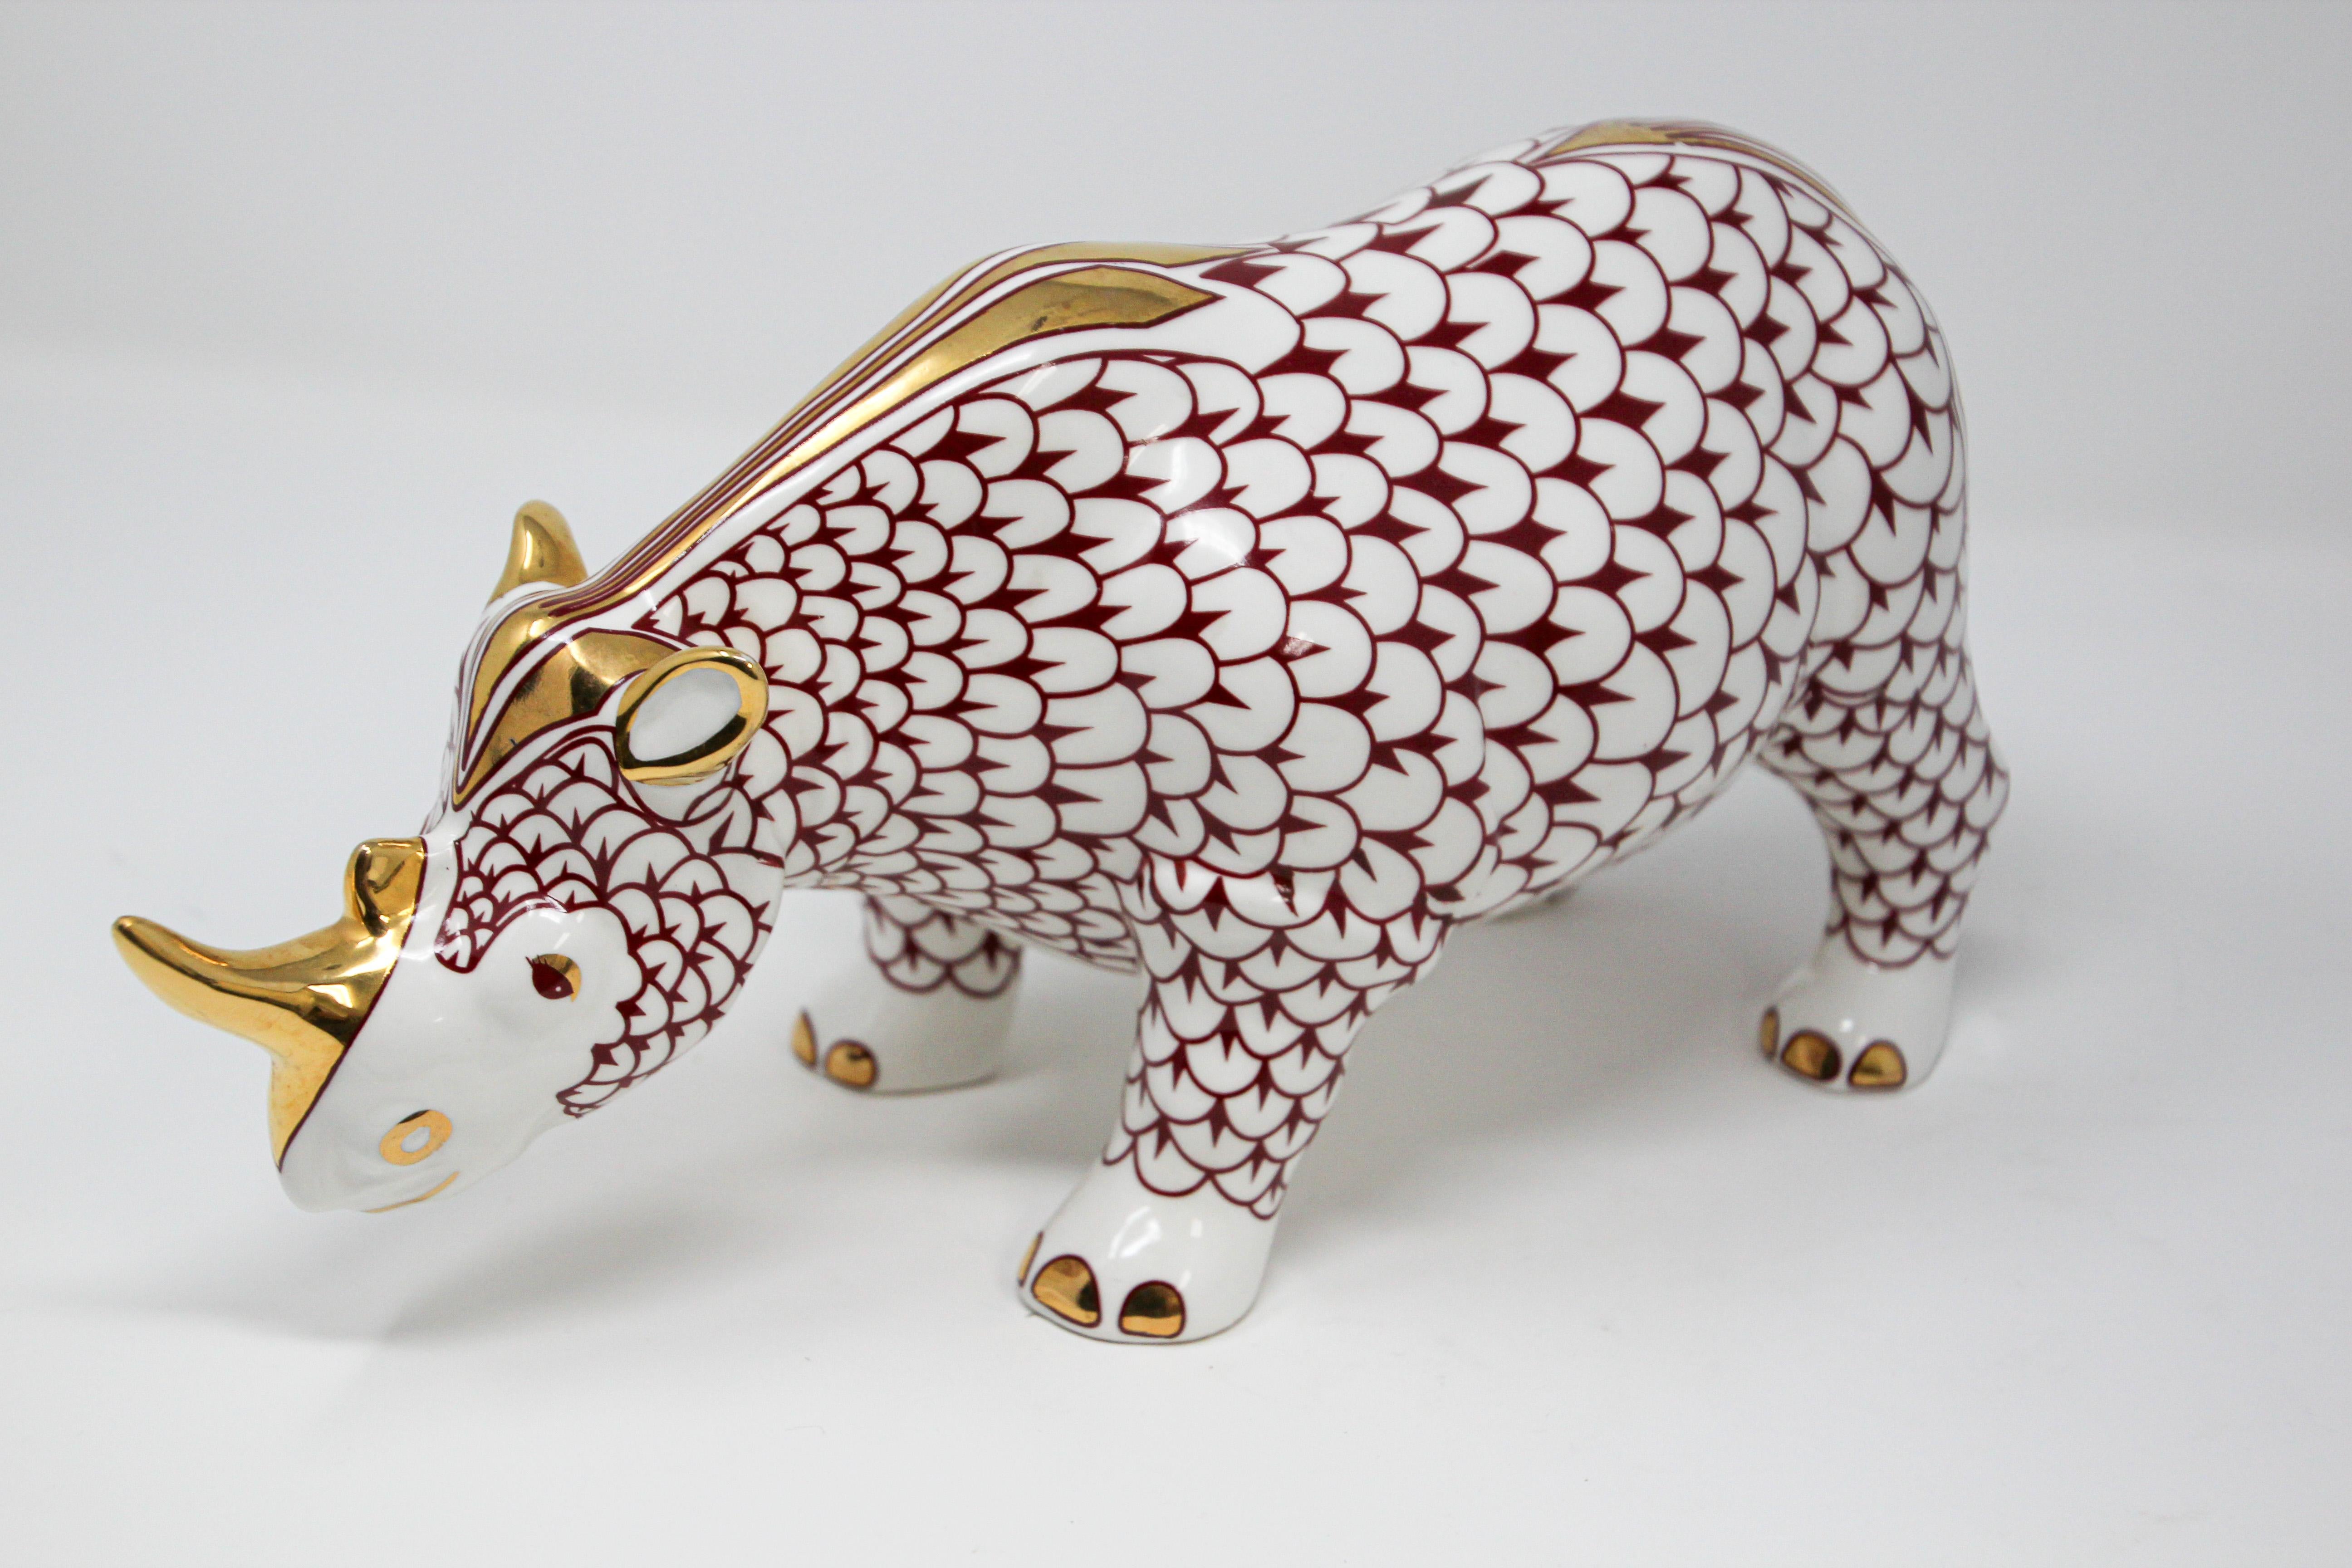 African Safari figural decorative porcelain Rhinoceros in Herend style.
Porcelain handmade and hand painted with rich shades of burgundy fishnet with 24-karat gold.
The Rhino is an elegant way to adorn your home with the spirit and image of the